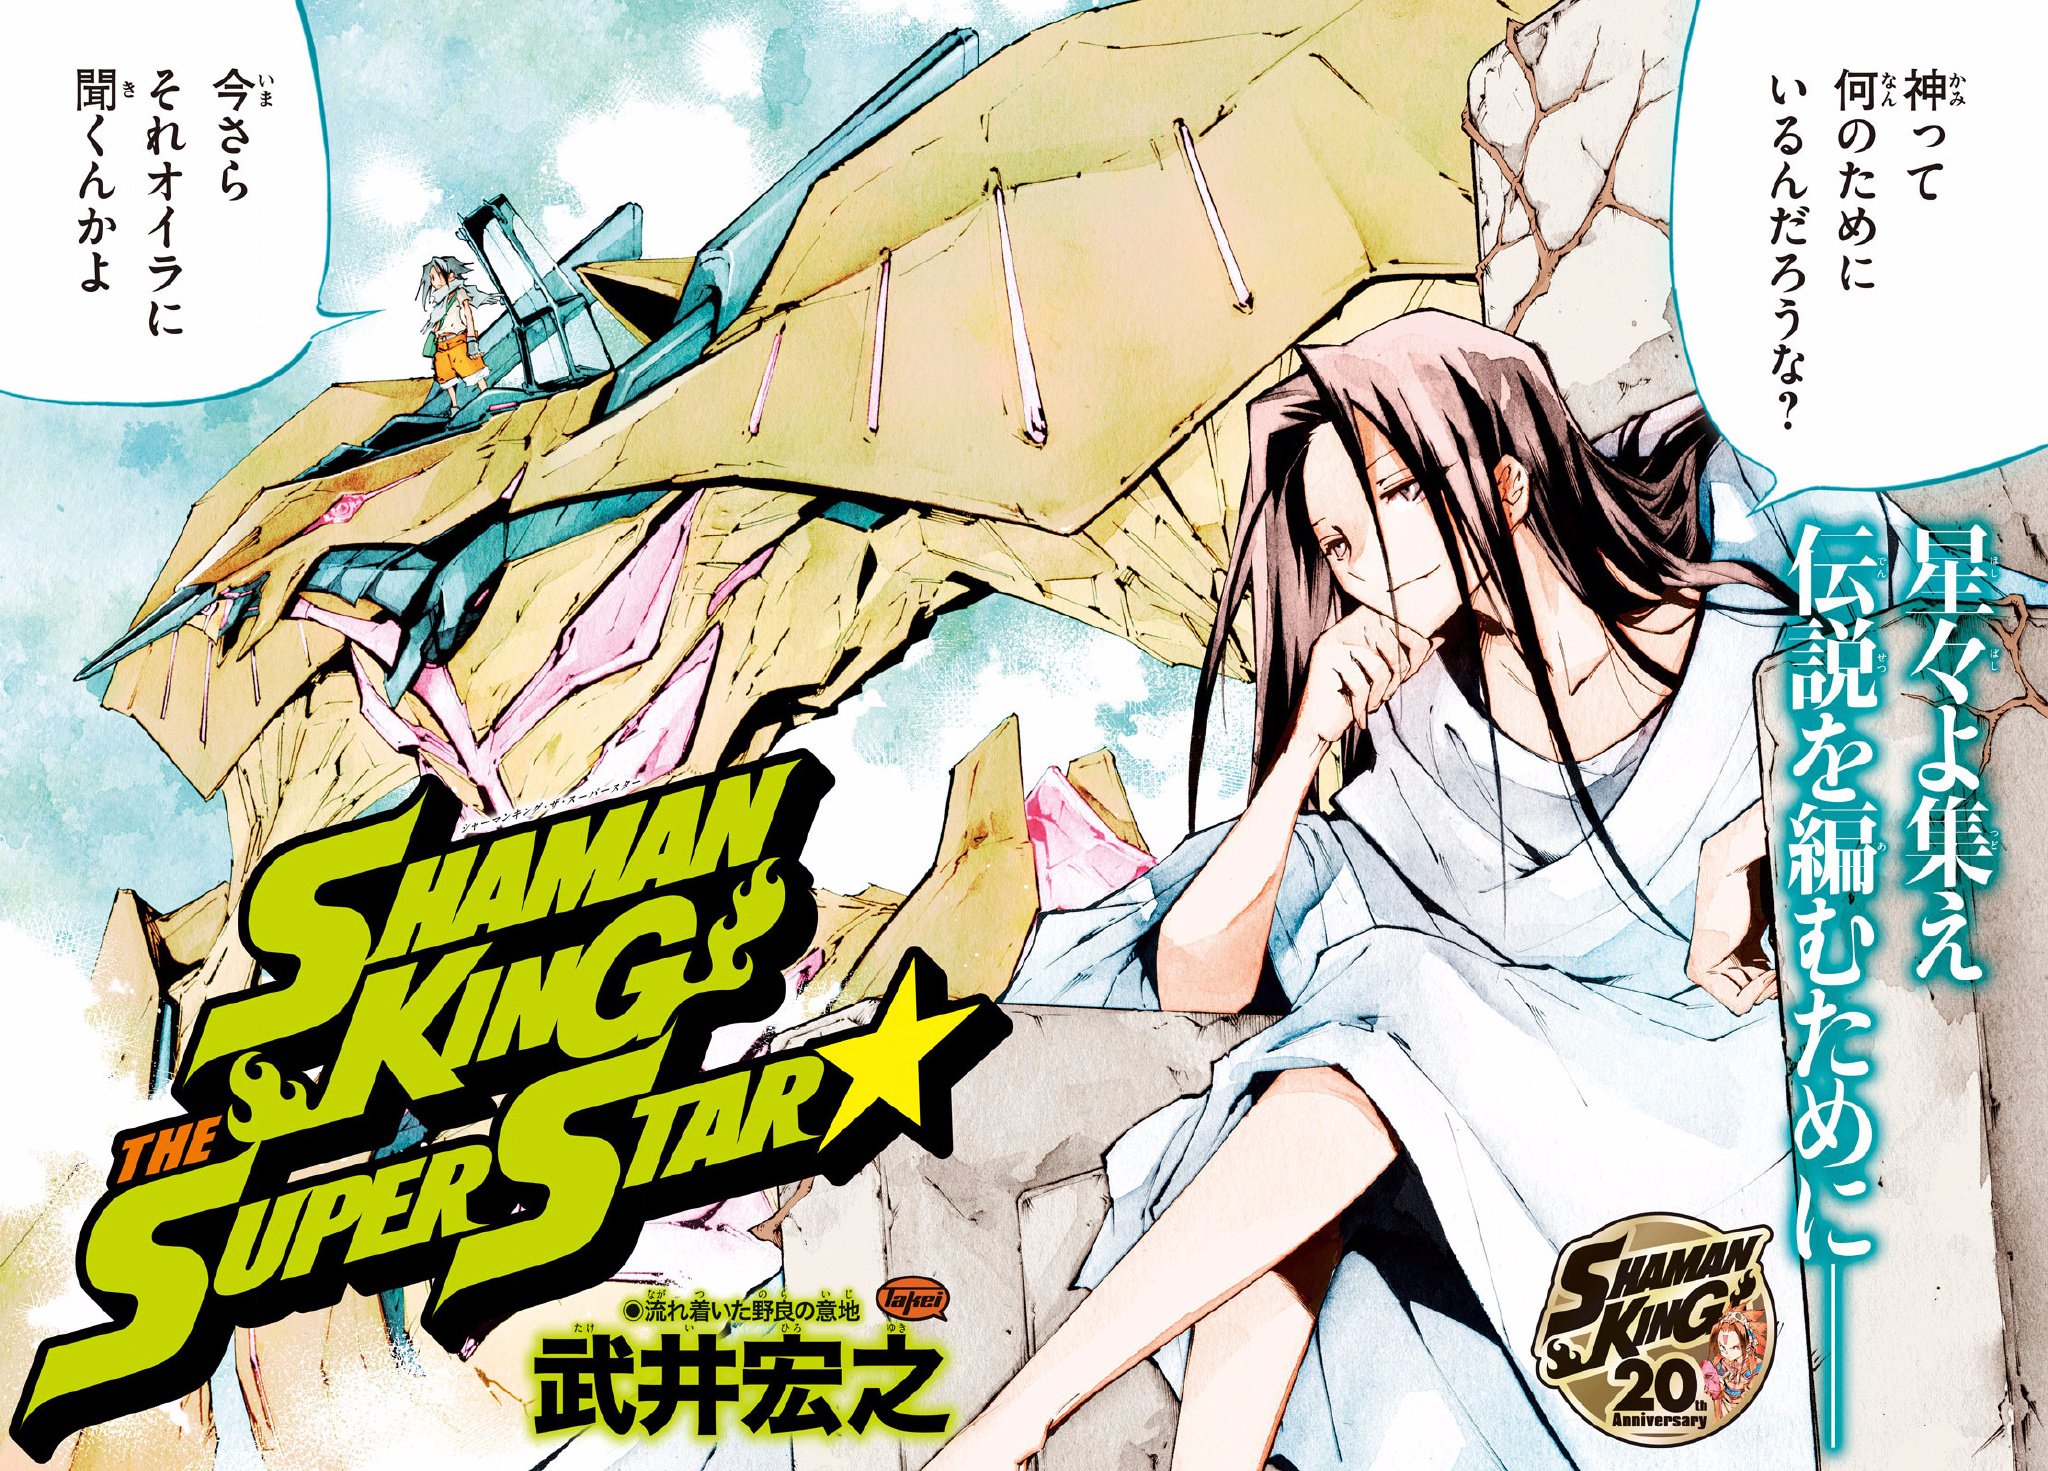 Zerods A Twitter Shaman King The Super Star Color Spread T Co Twh6pkw0vk Twitter